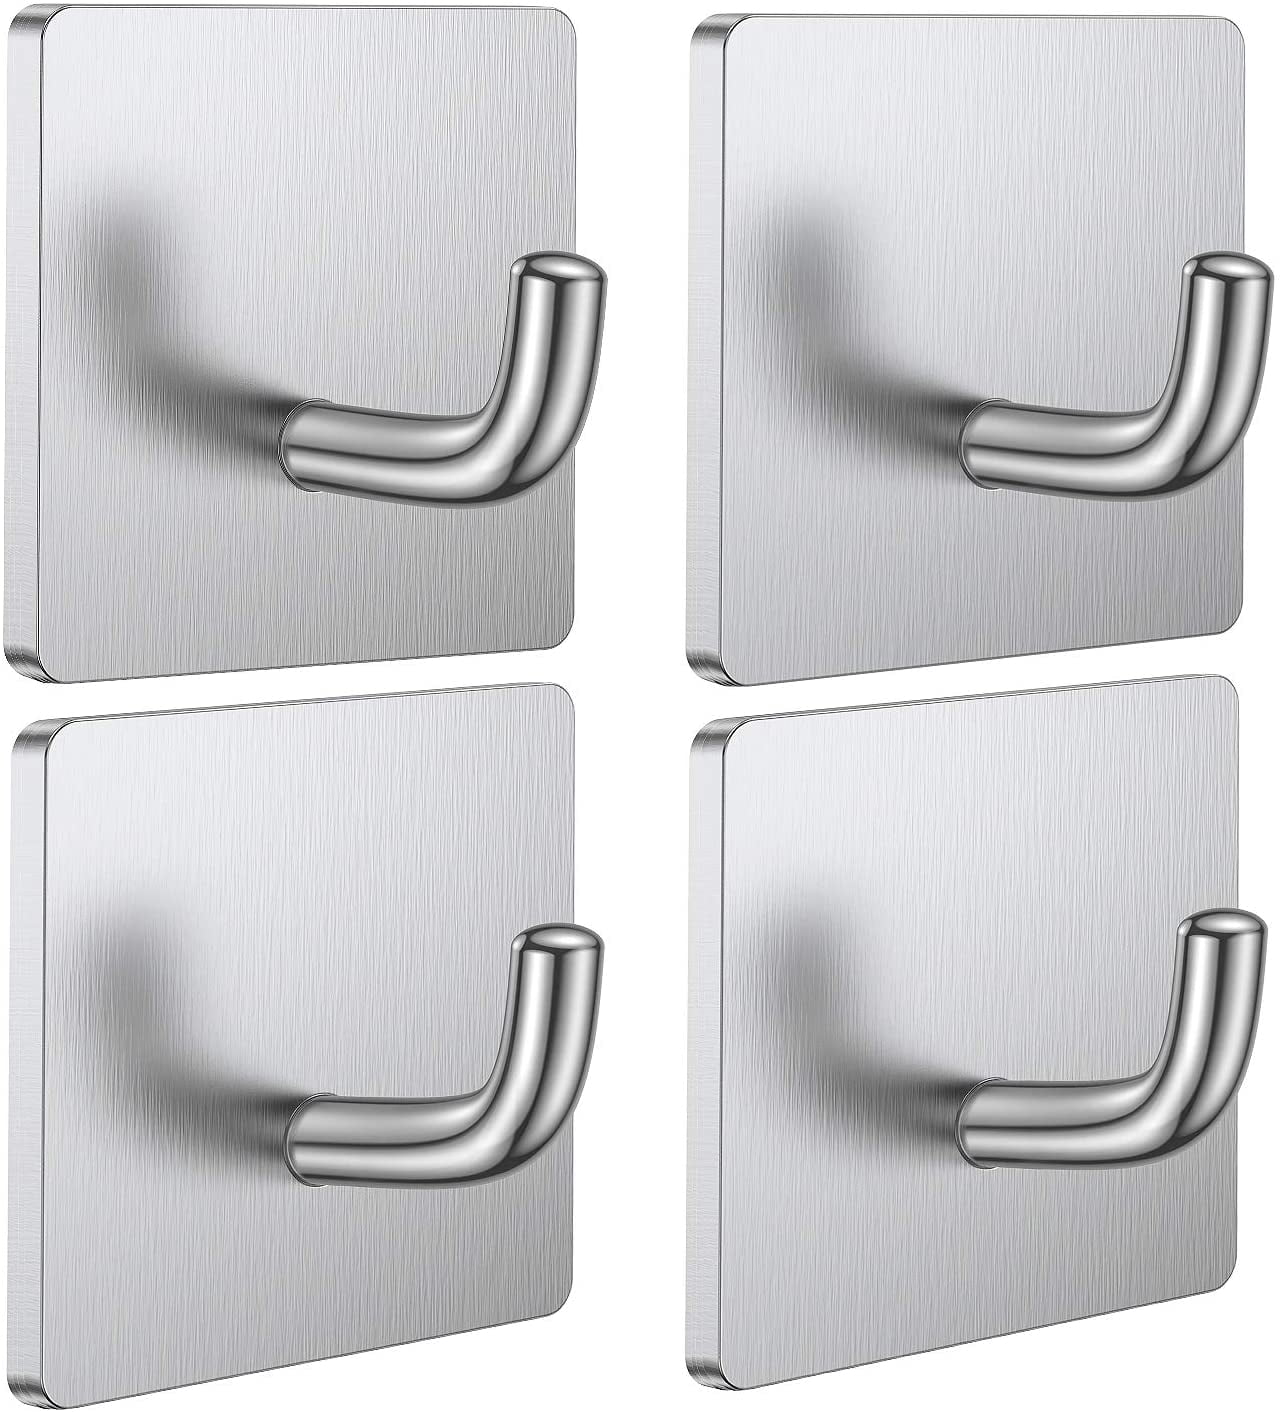 Adhesive Hooks 3M Heavy Duty Stick On Wall Door Cabinet Stainless Steel Towel Coat Clothes Hooks Self Adhesive Holders for Hanging Kitchen Bathroom